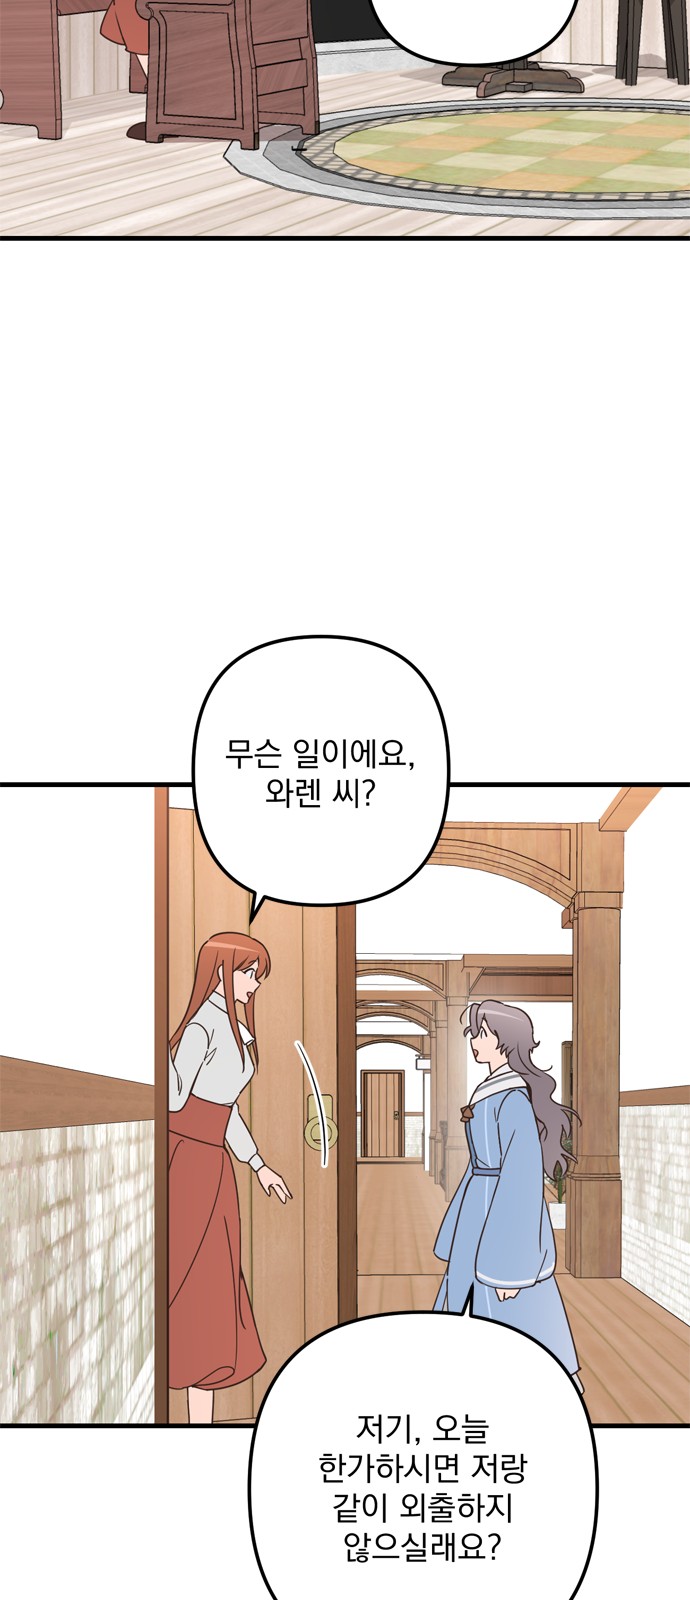 Single Wizard's Dormitory Apartment - Chapter 64 - Page 3